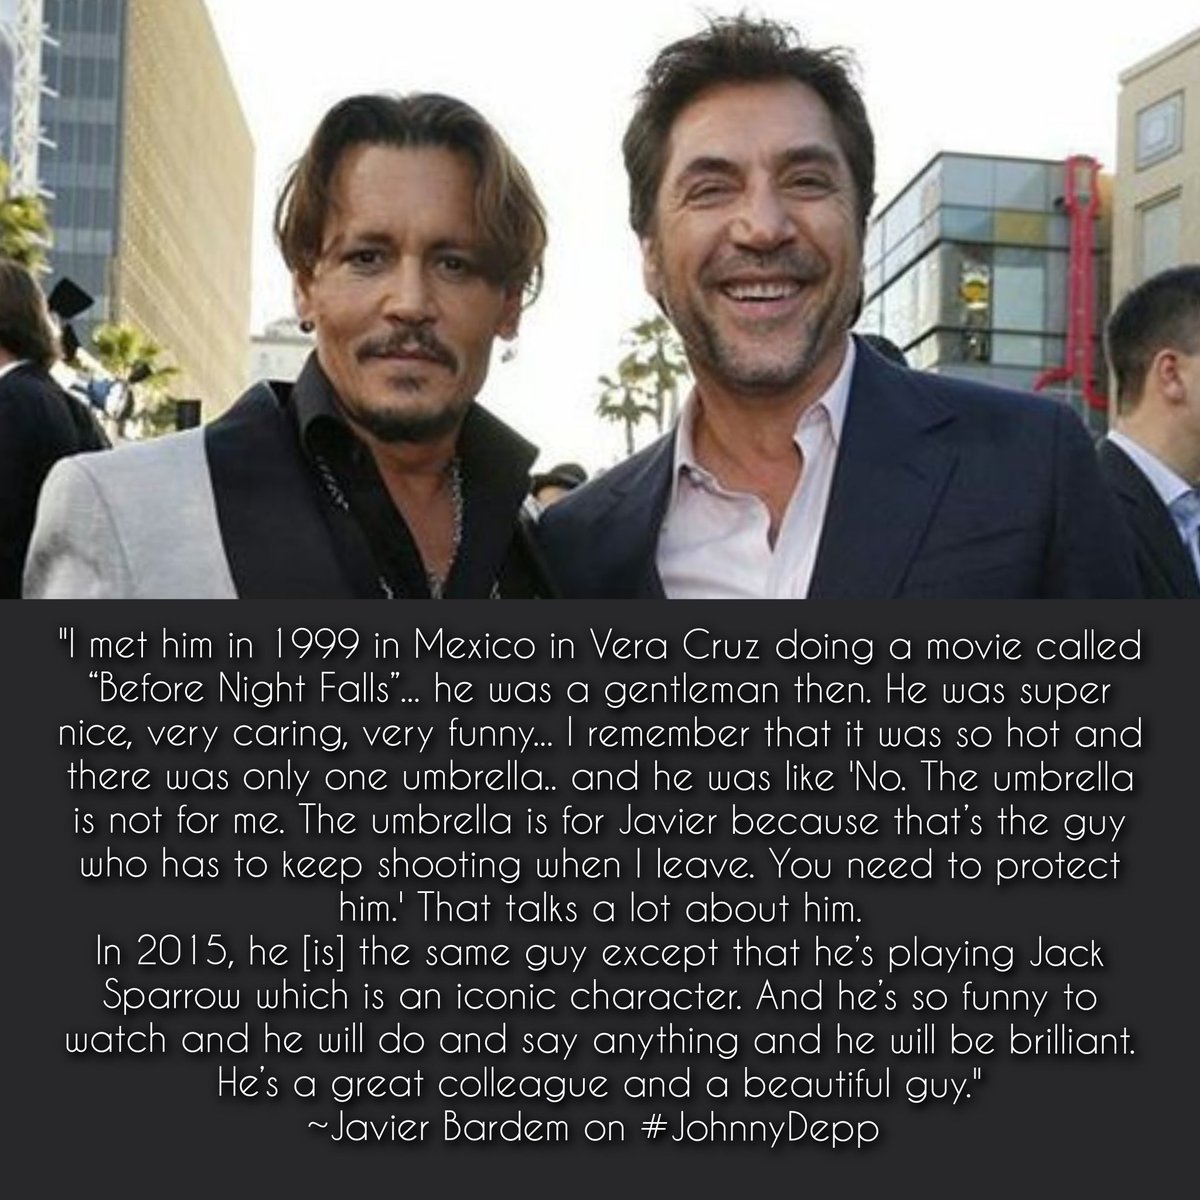 'I met him in 1999... he was a gentleman then. He was super nice, very caring, very funny...
In 2015 he’s playing Jack Sparrow... And he’s so funny... and he will do & say anything and he will be brilliant. He’s a great colleague & a beautiful guy.'
~Javier Bardem on #JohnnyDepp